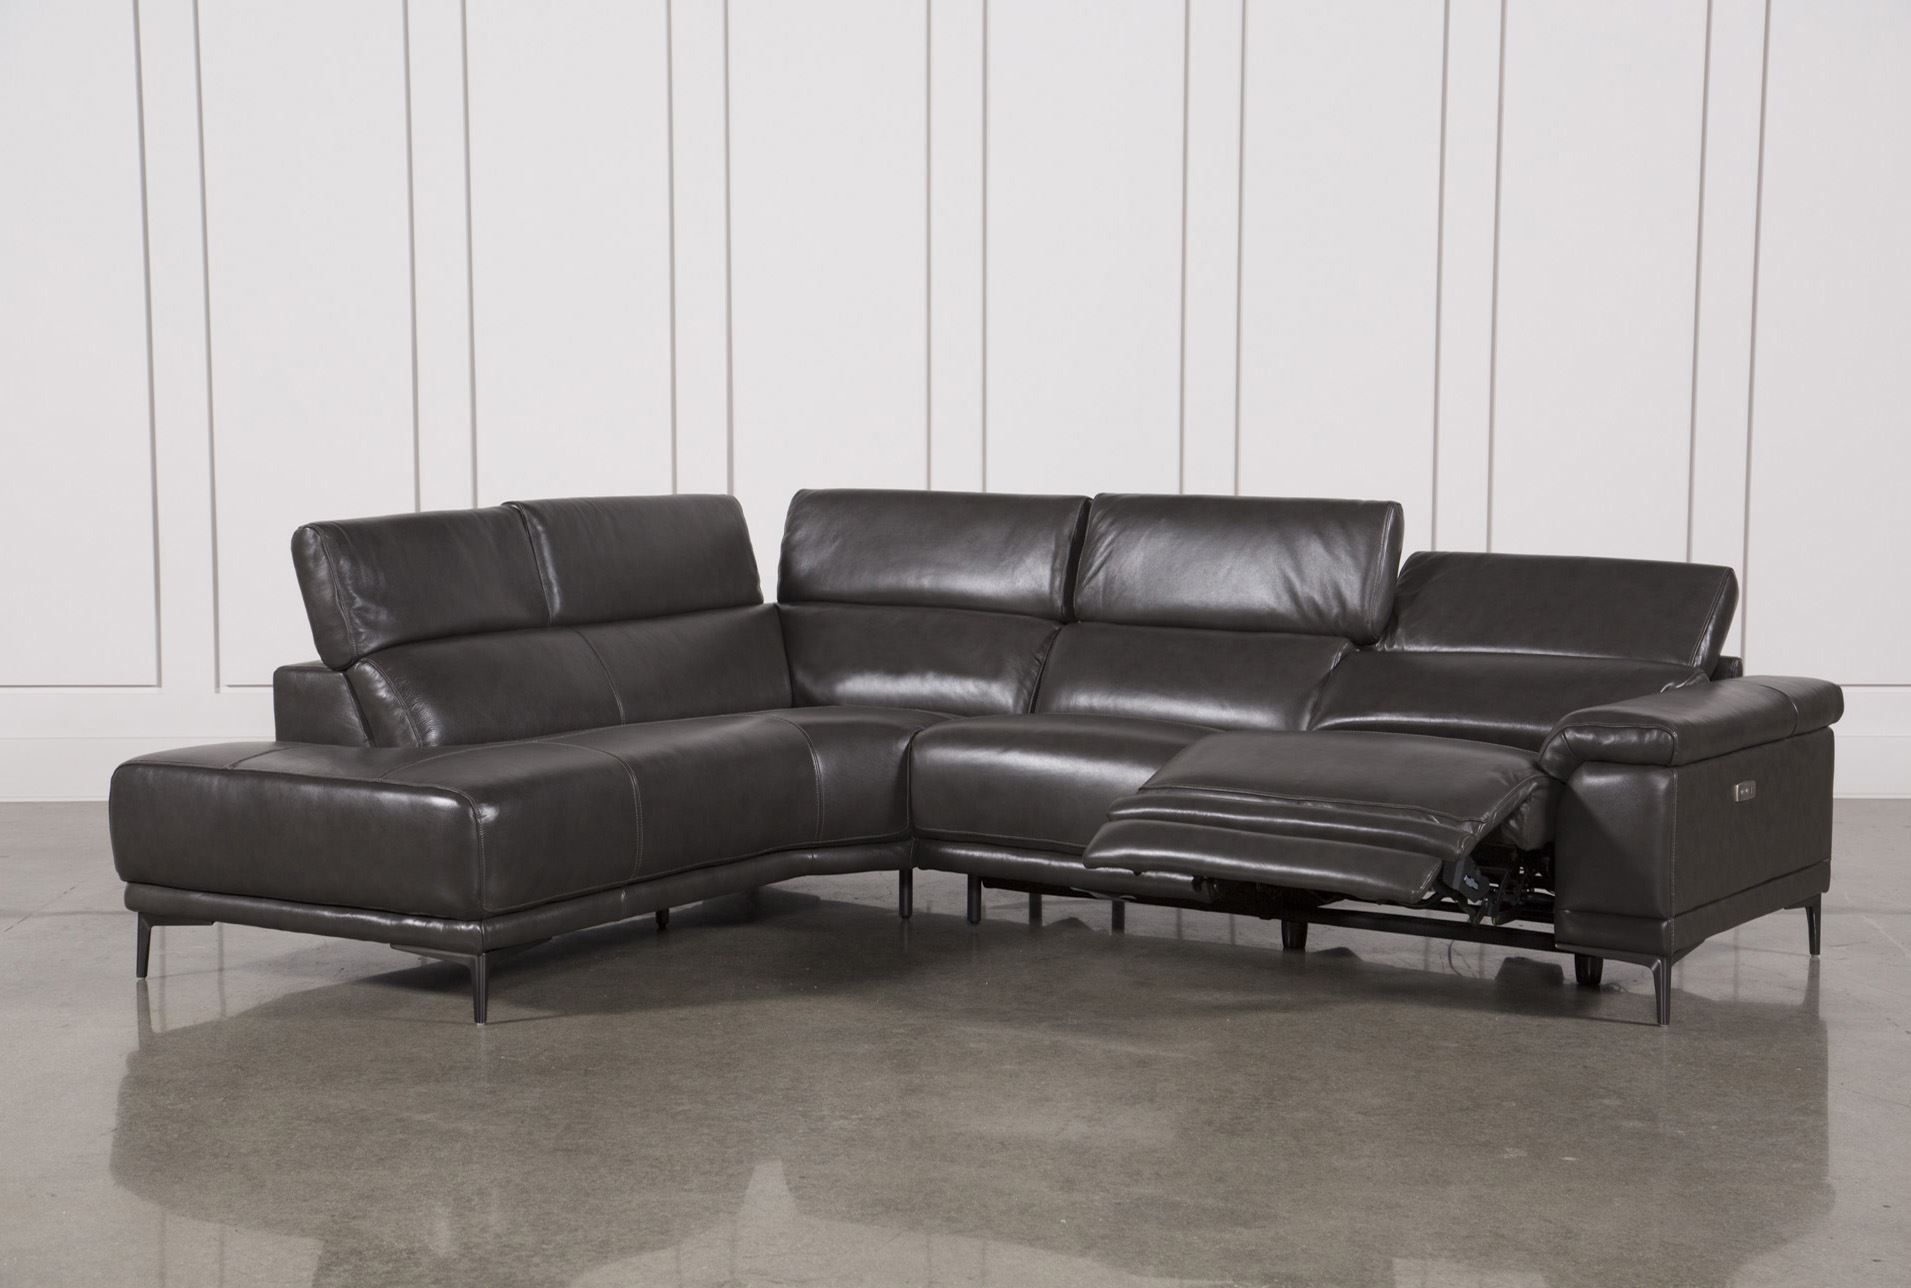 Tatum Dark Grey 2 Piece Sectional W/laf Chaise | Modern Sectional Regarding Tatum Dark Grey 2 Piece Sectionals With Raf Chaise (View 1 of 30)